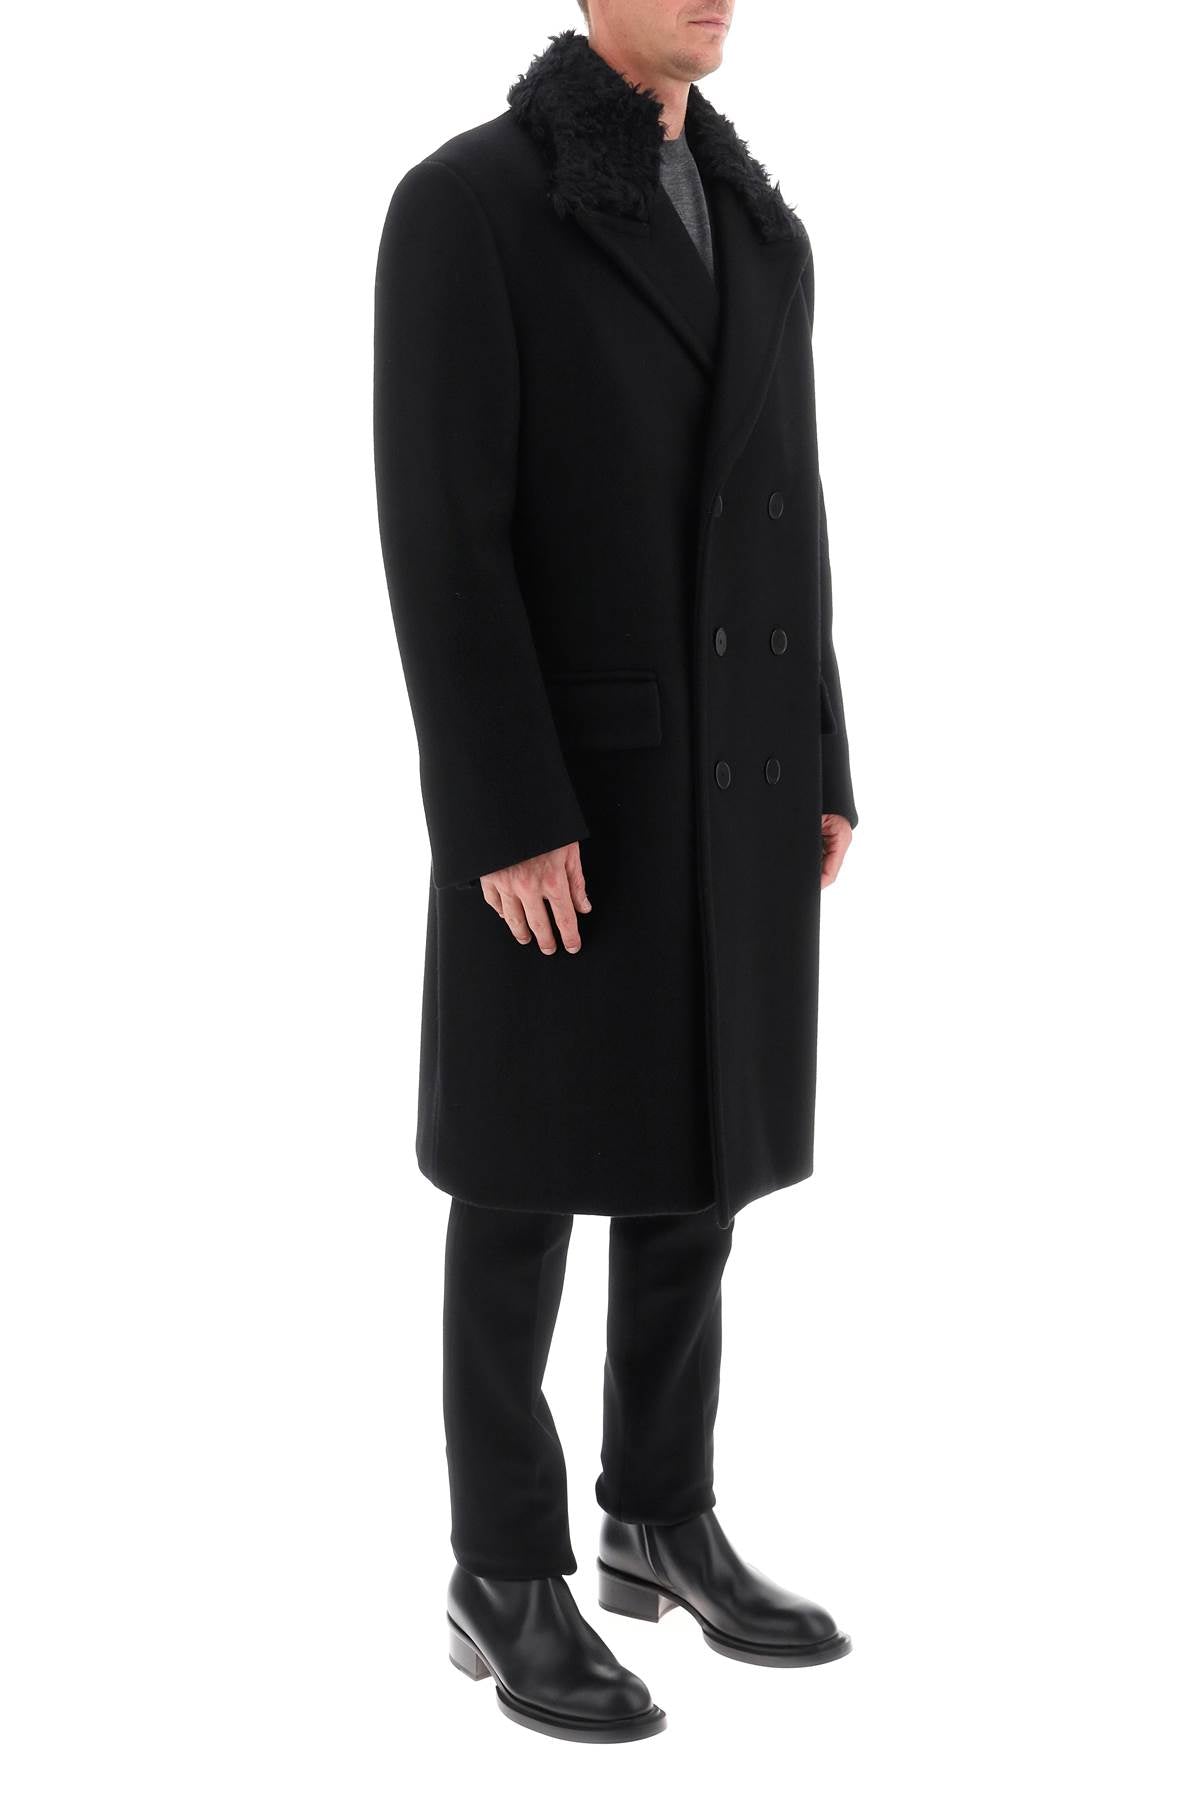 LANVIN Men's Black Wool Double-Breasted Jacket with Removable Mohair Collar